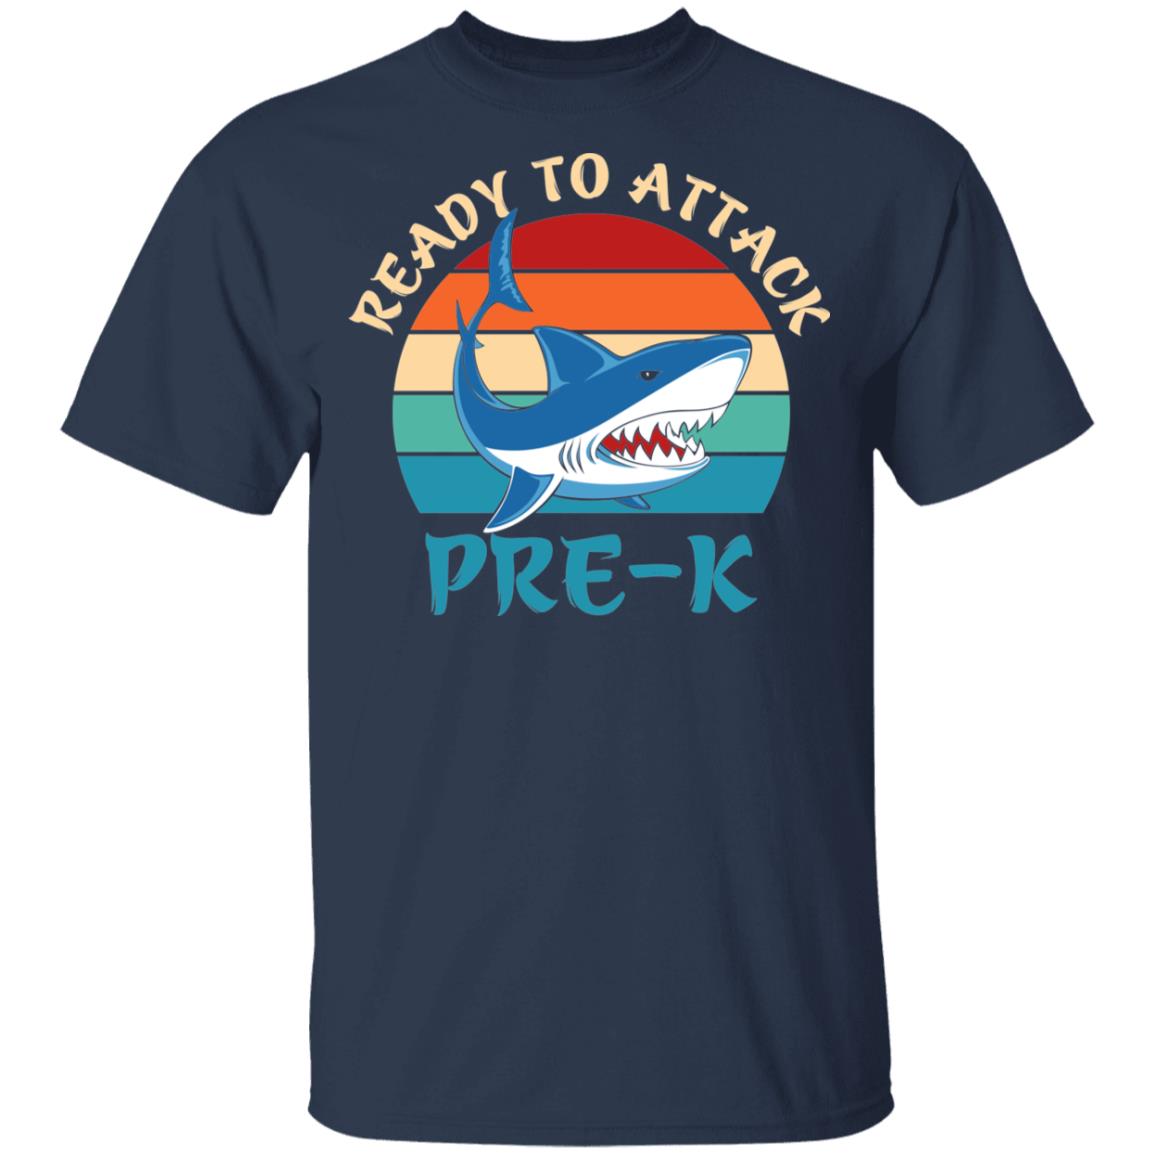 Ready To Attack Pre-K Shark Back To School Shirt